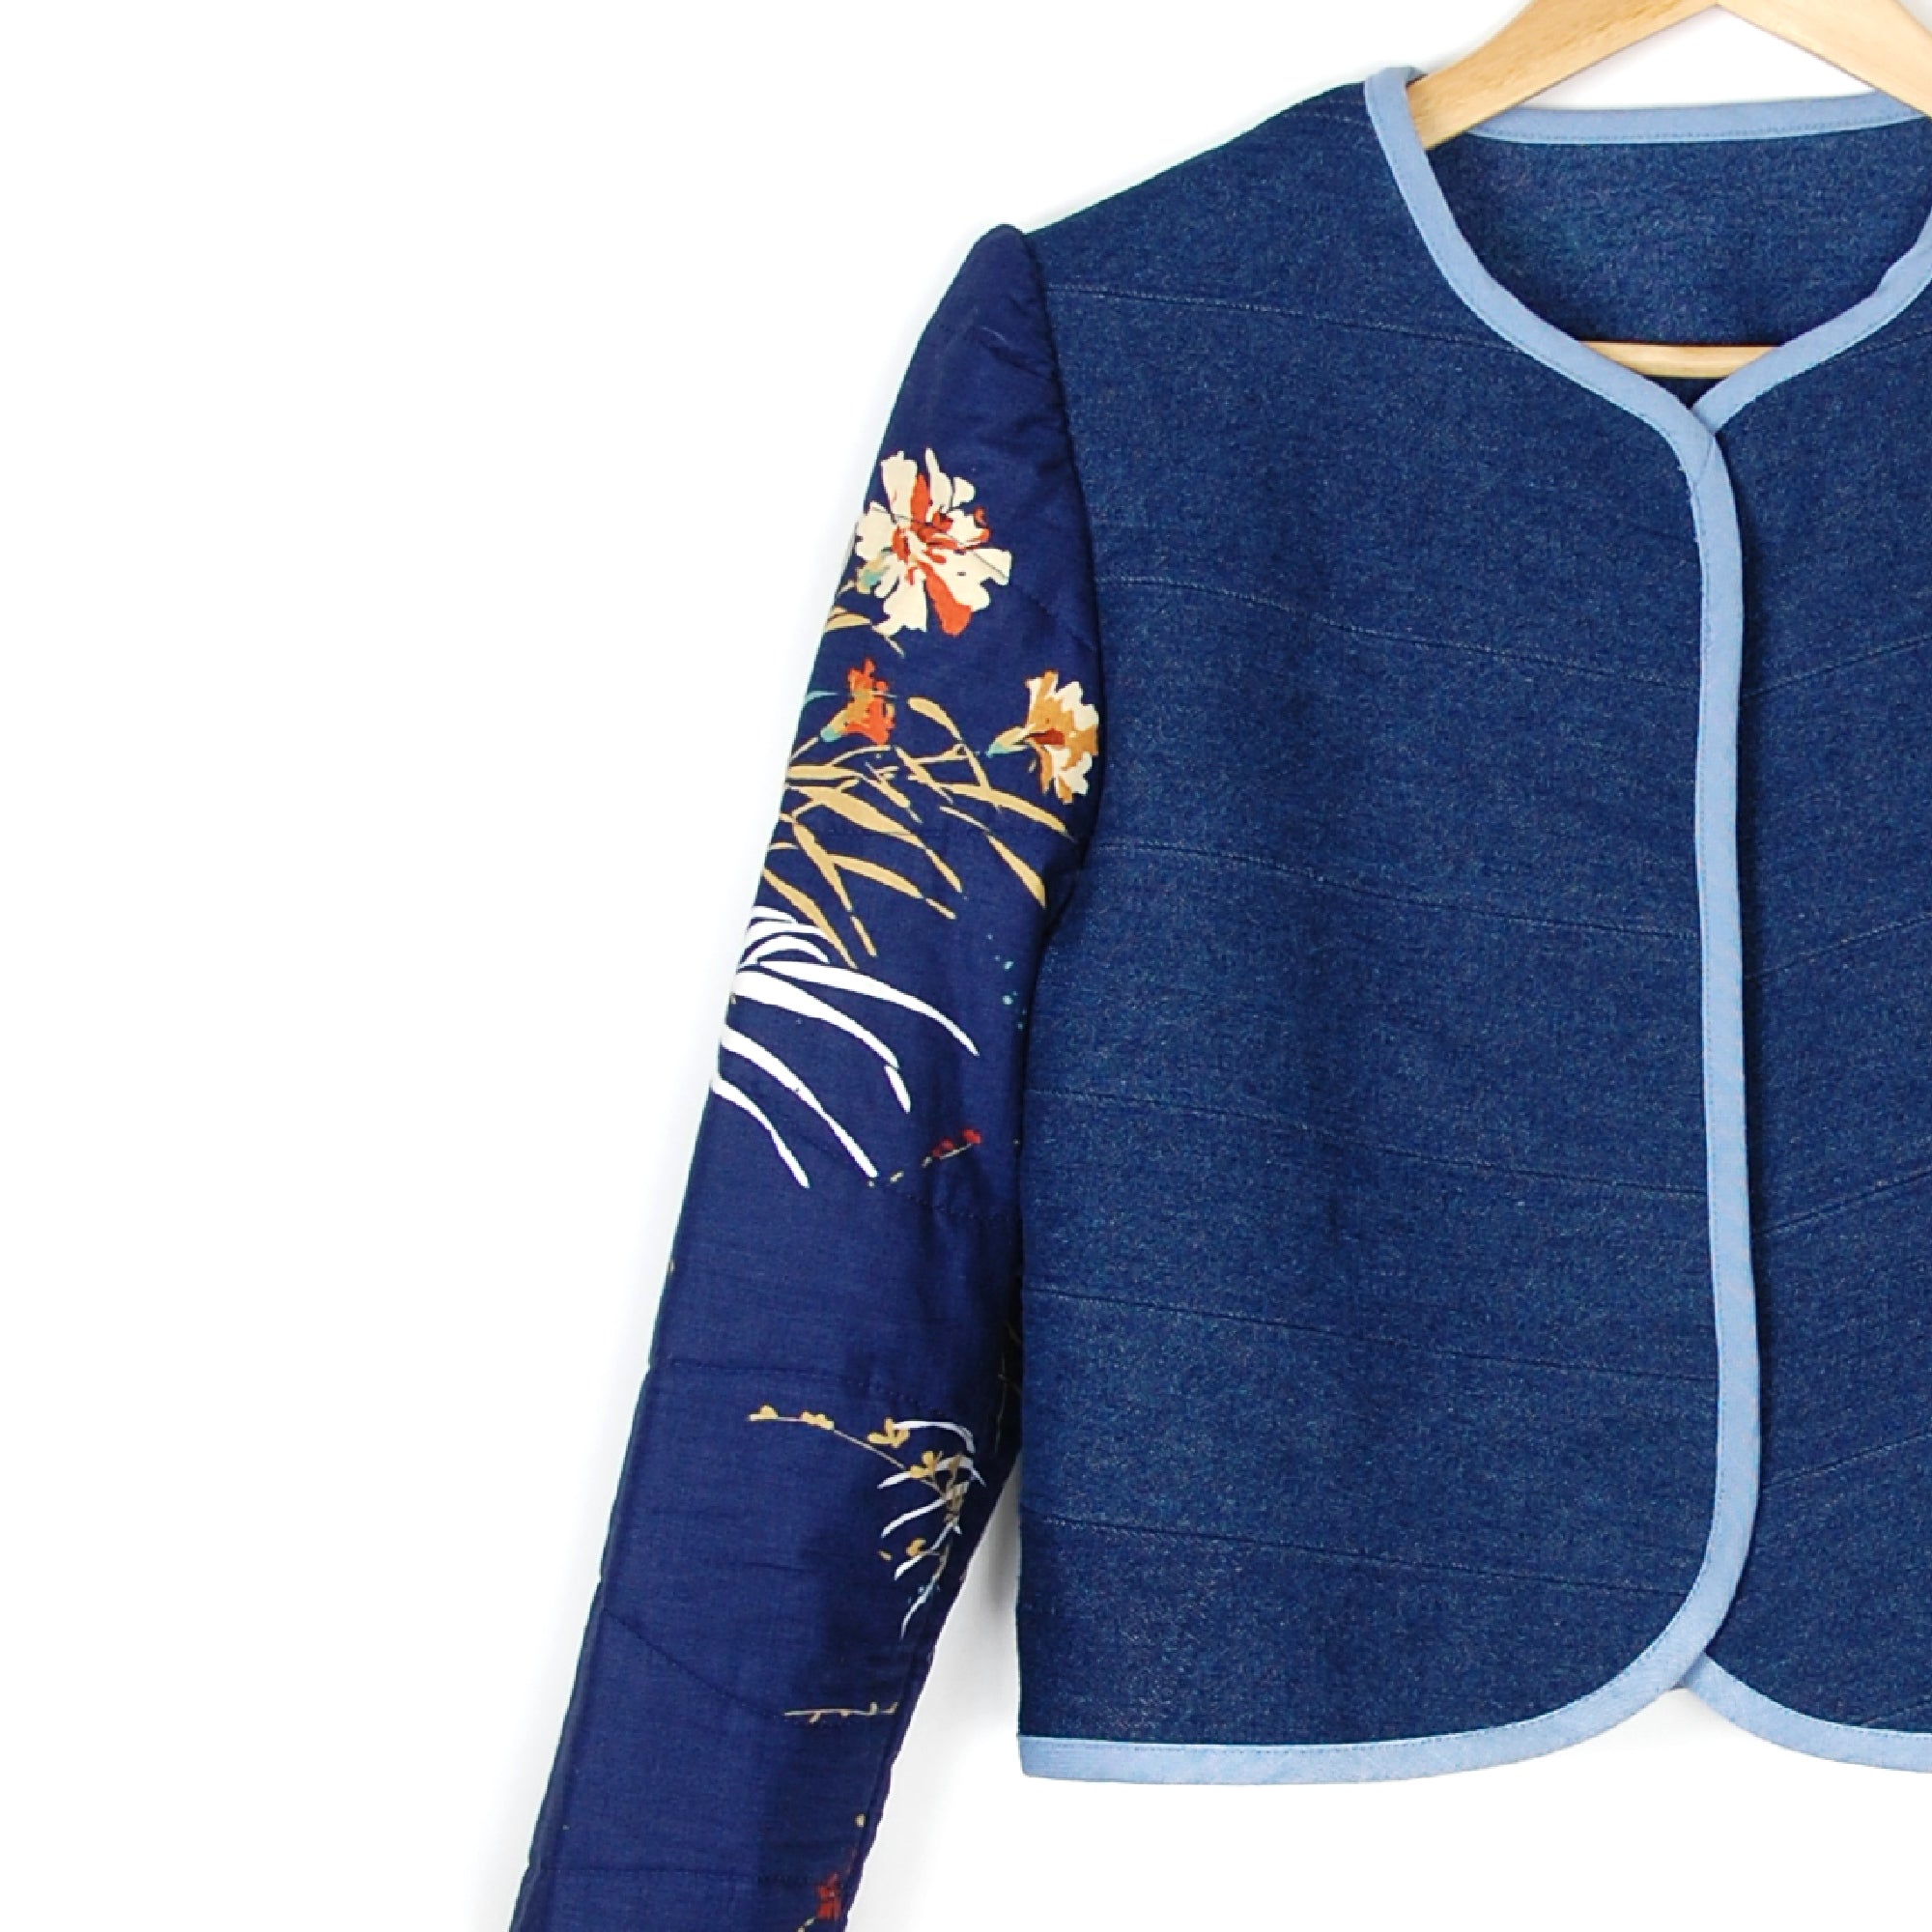 THE DARK CARNATION QUILTED JACKET - Late to the Party